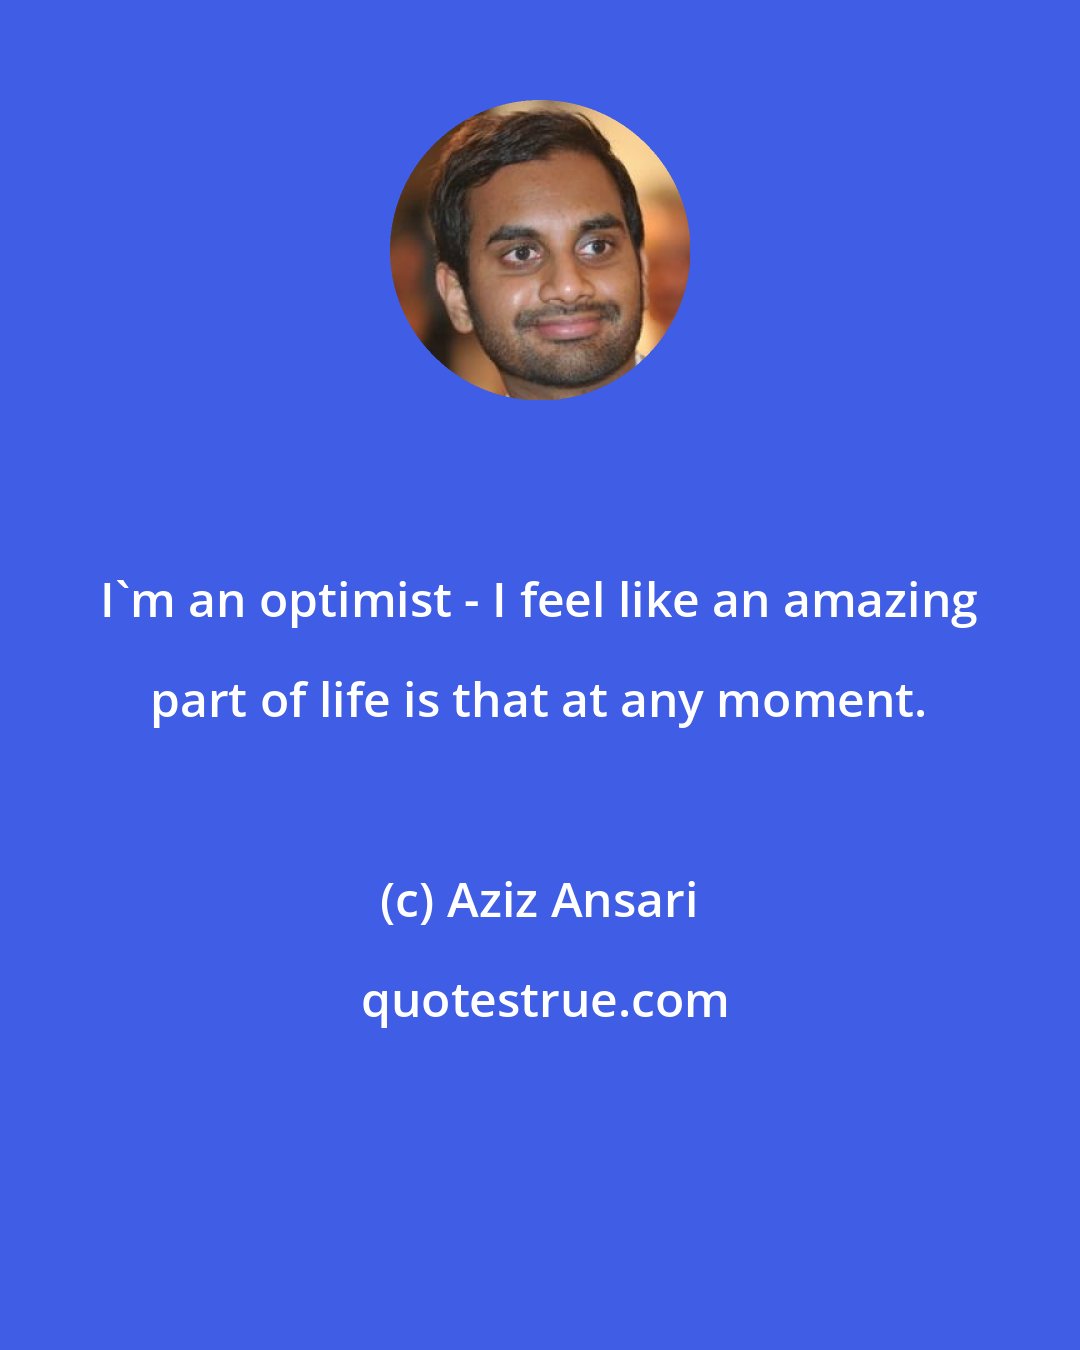 Aziz Ansari: I'm an optimist - I feel like an amazing part of life is that at any moment.